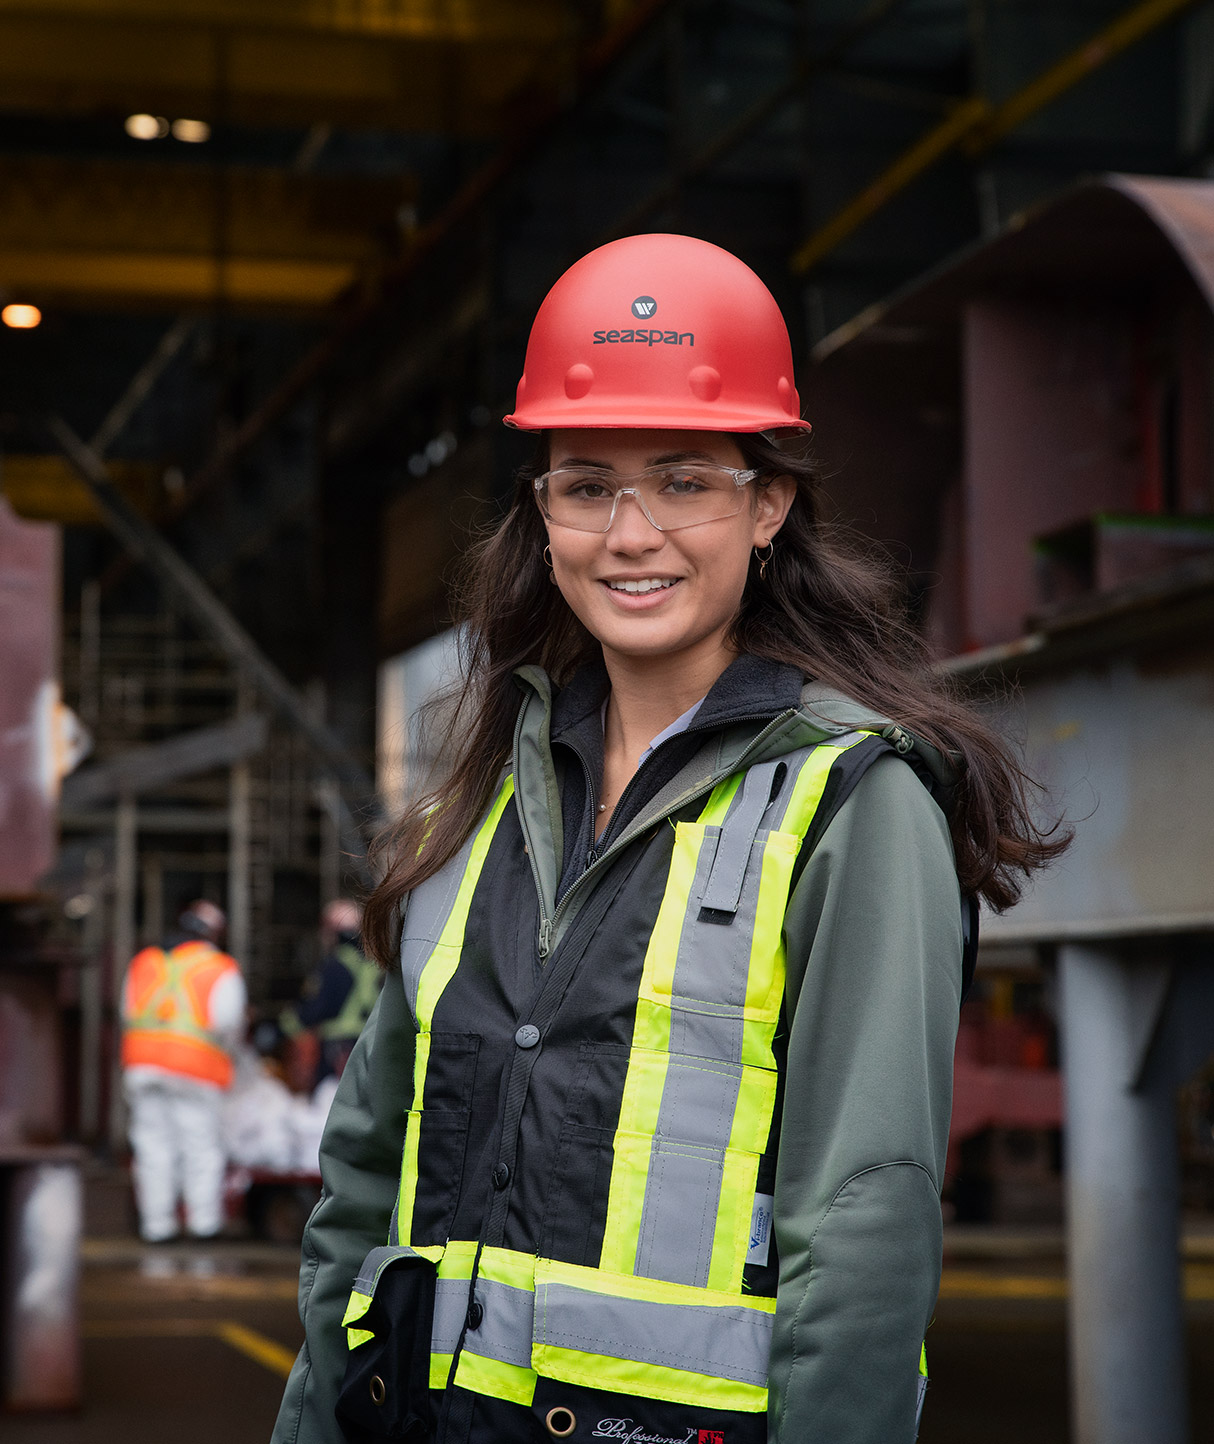 A portrait of a Female Seaspan employee wearing a red hard hat and a safety vest.